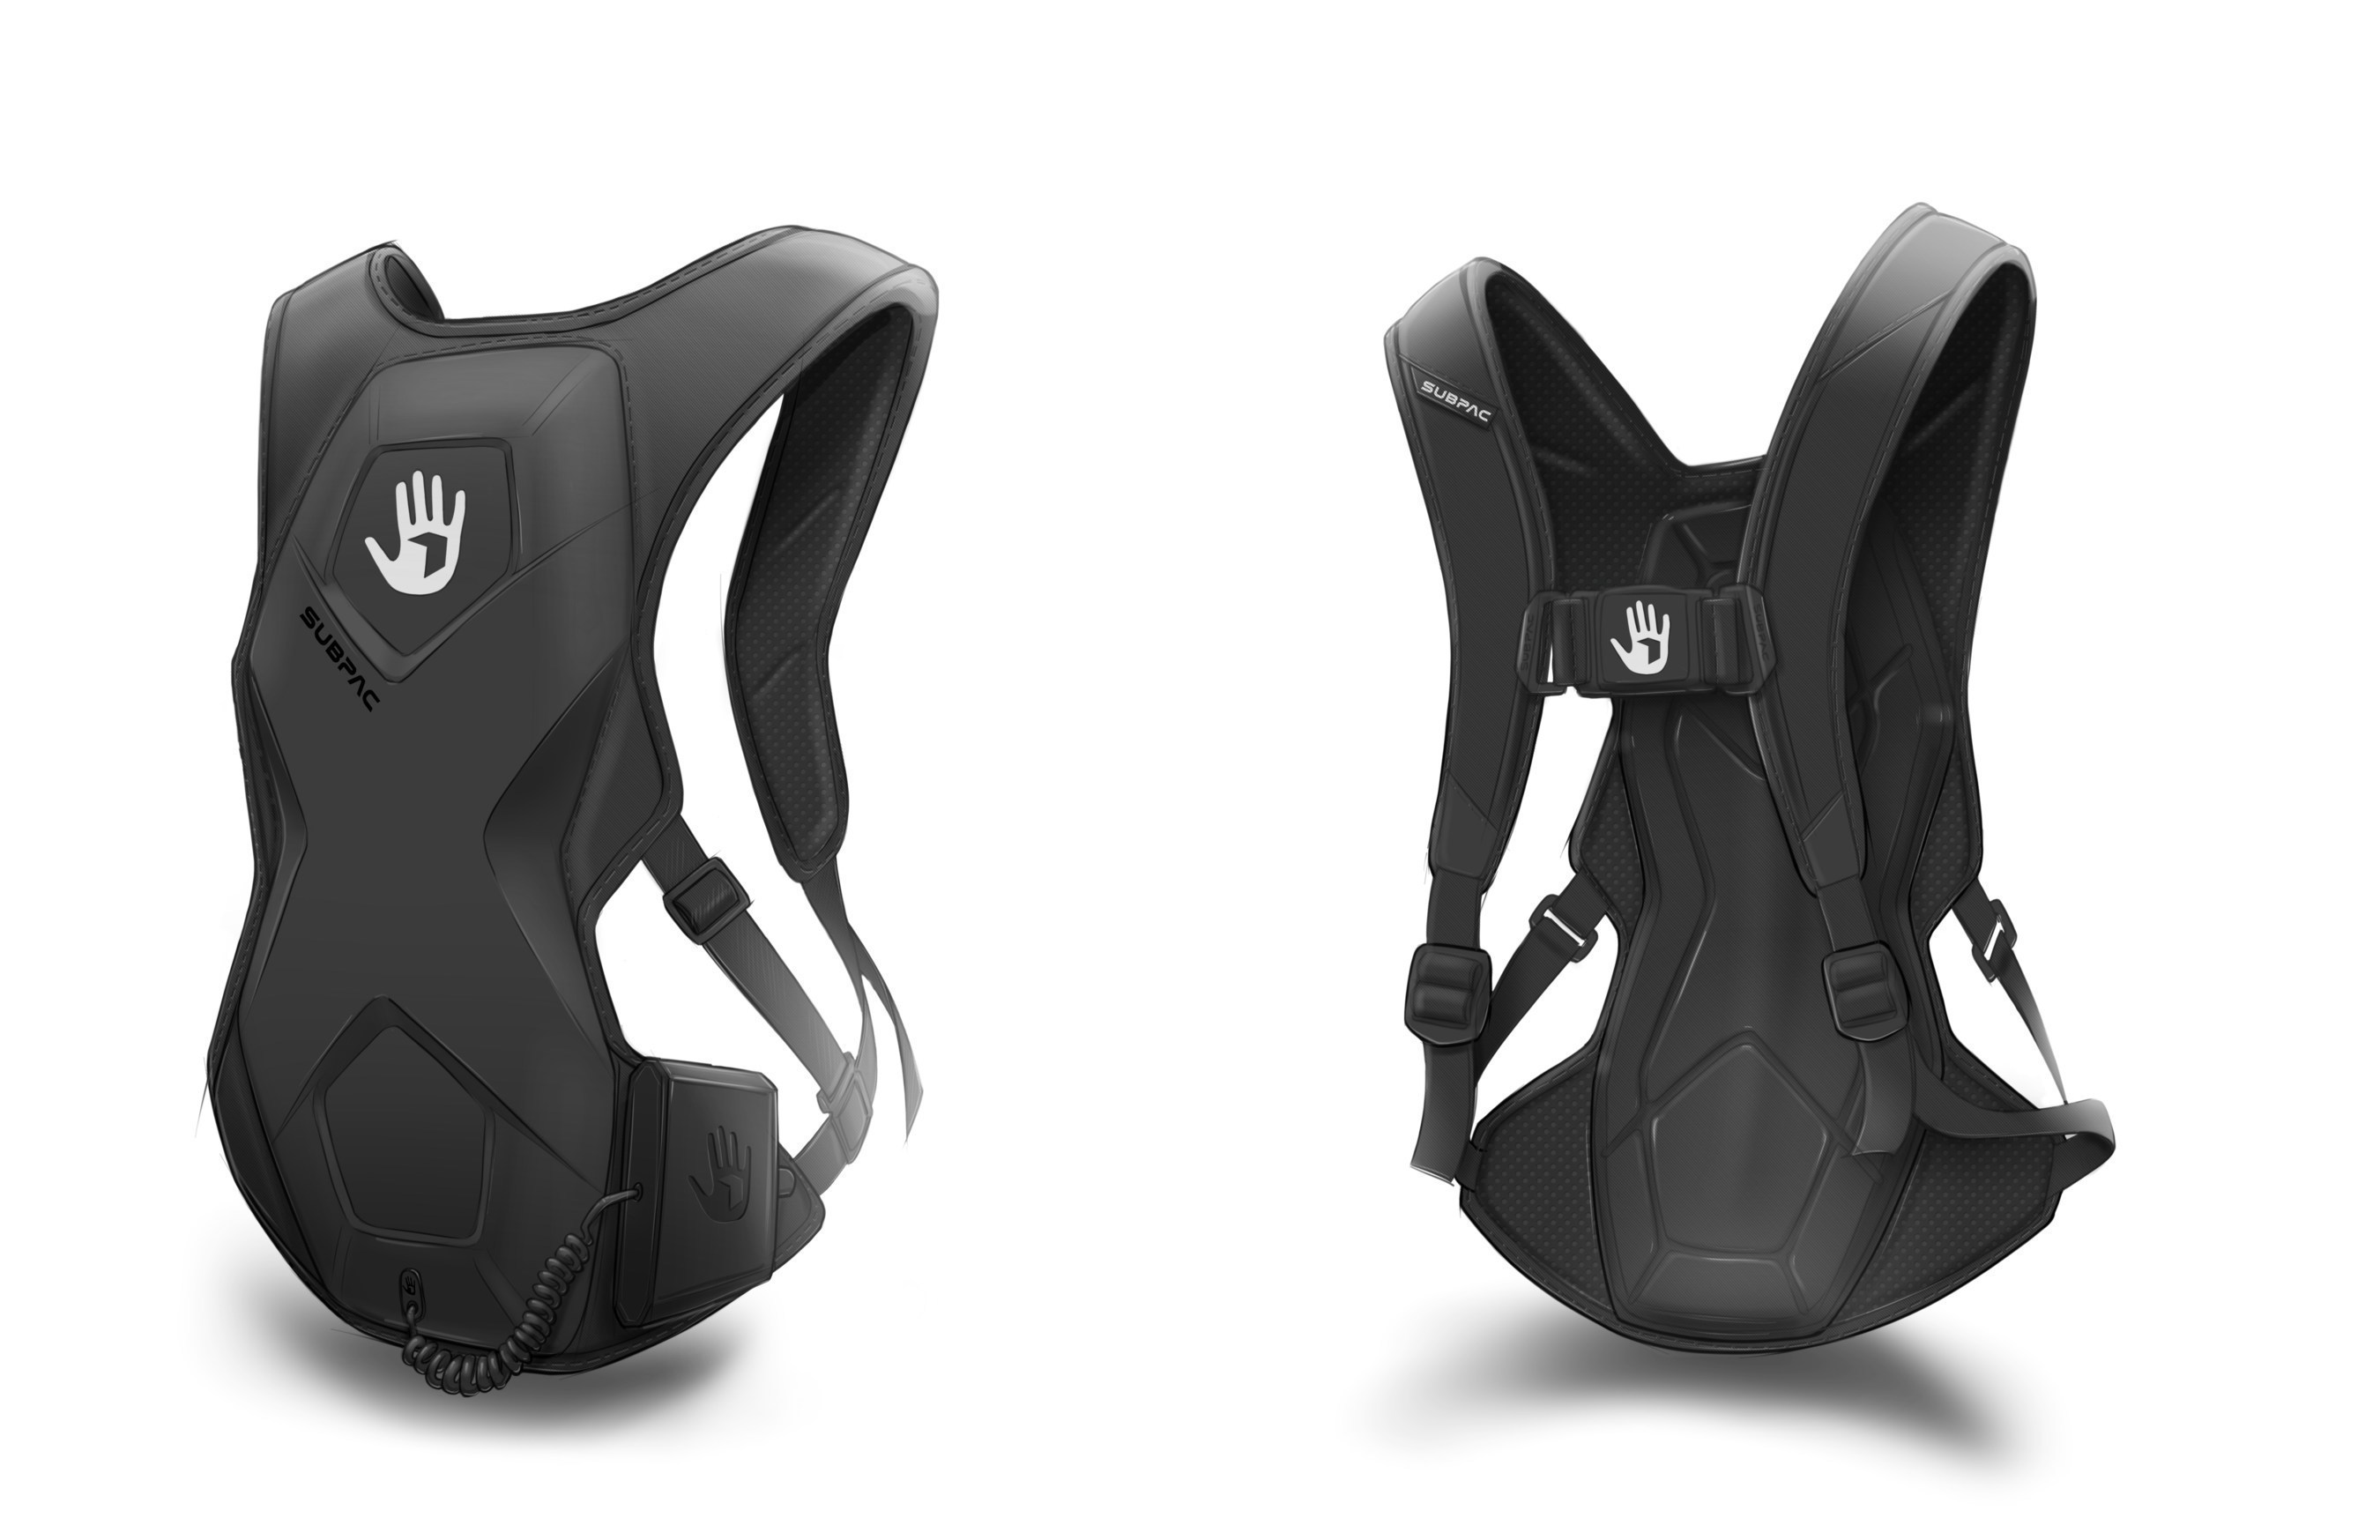 SubPac Brings A New Physical Dimension In Audio To Enhance Your